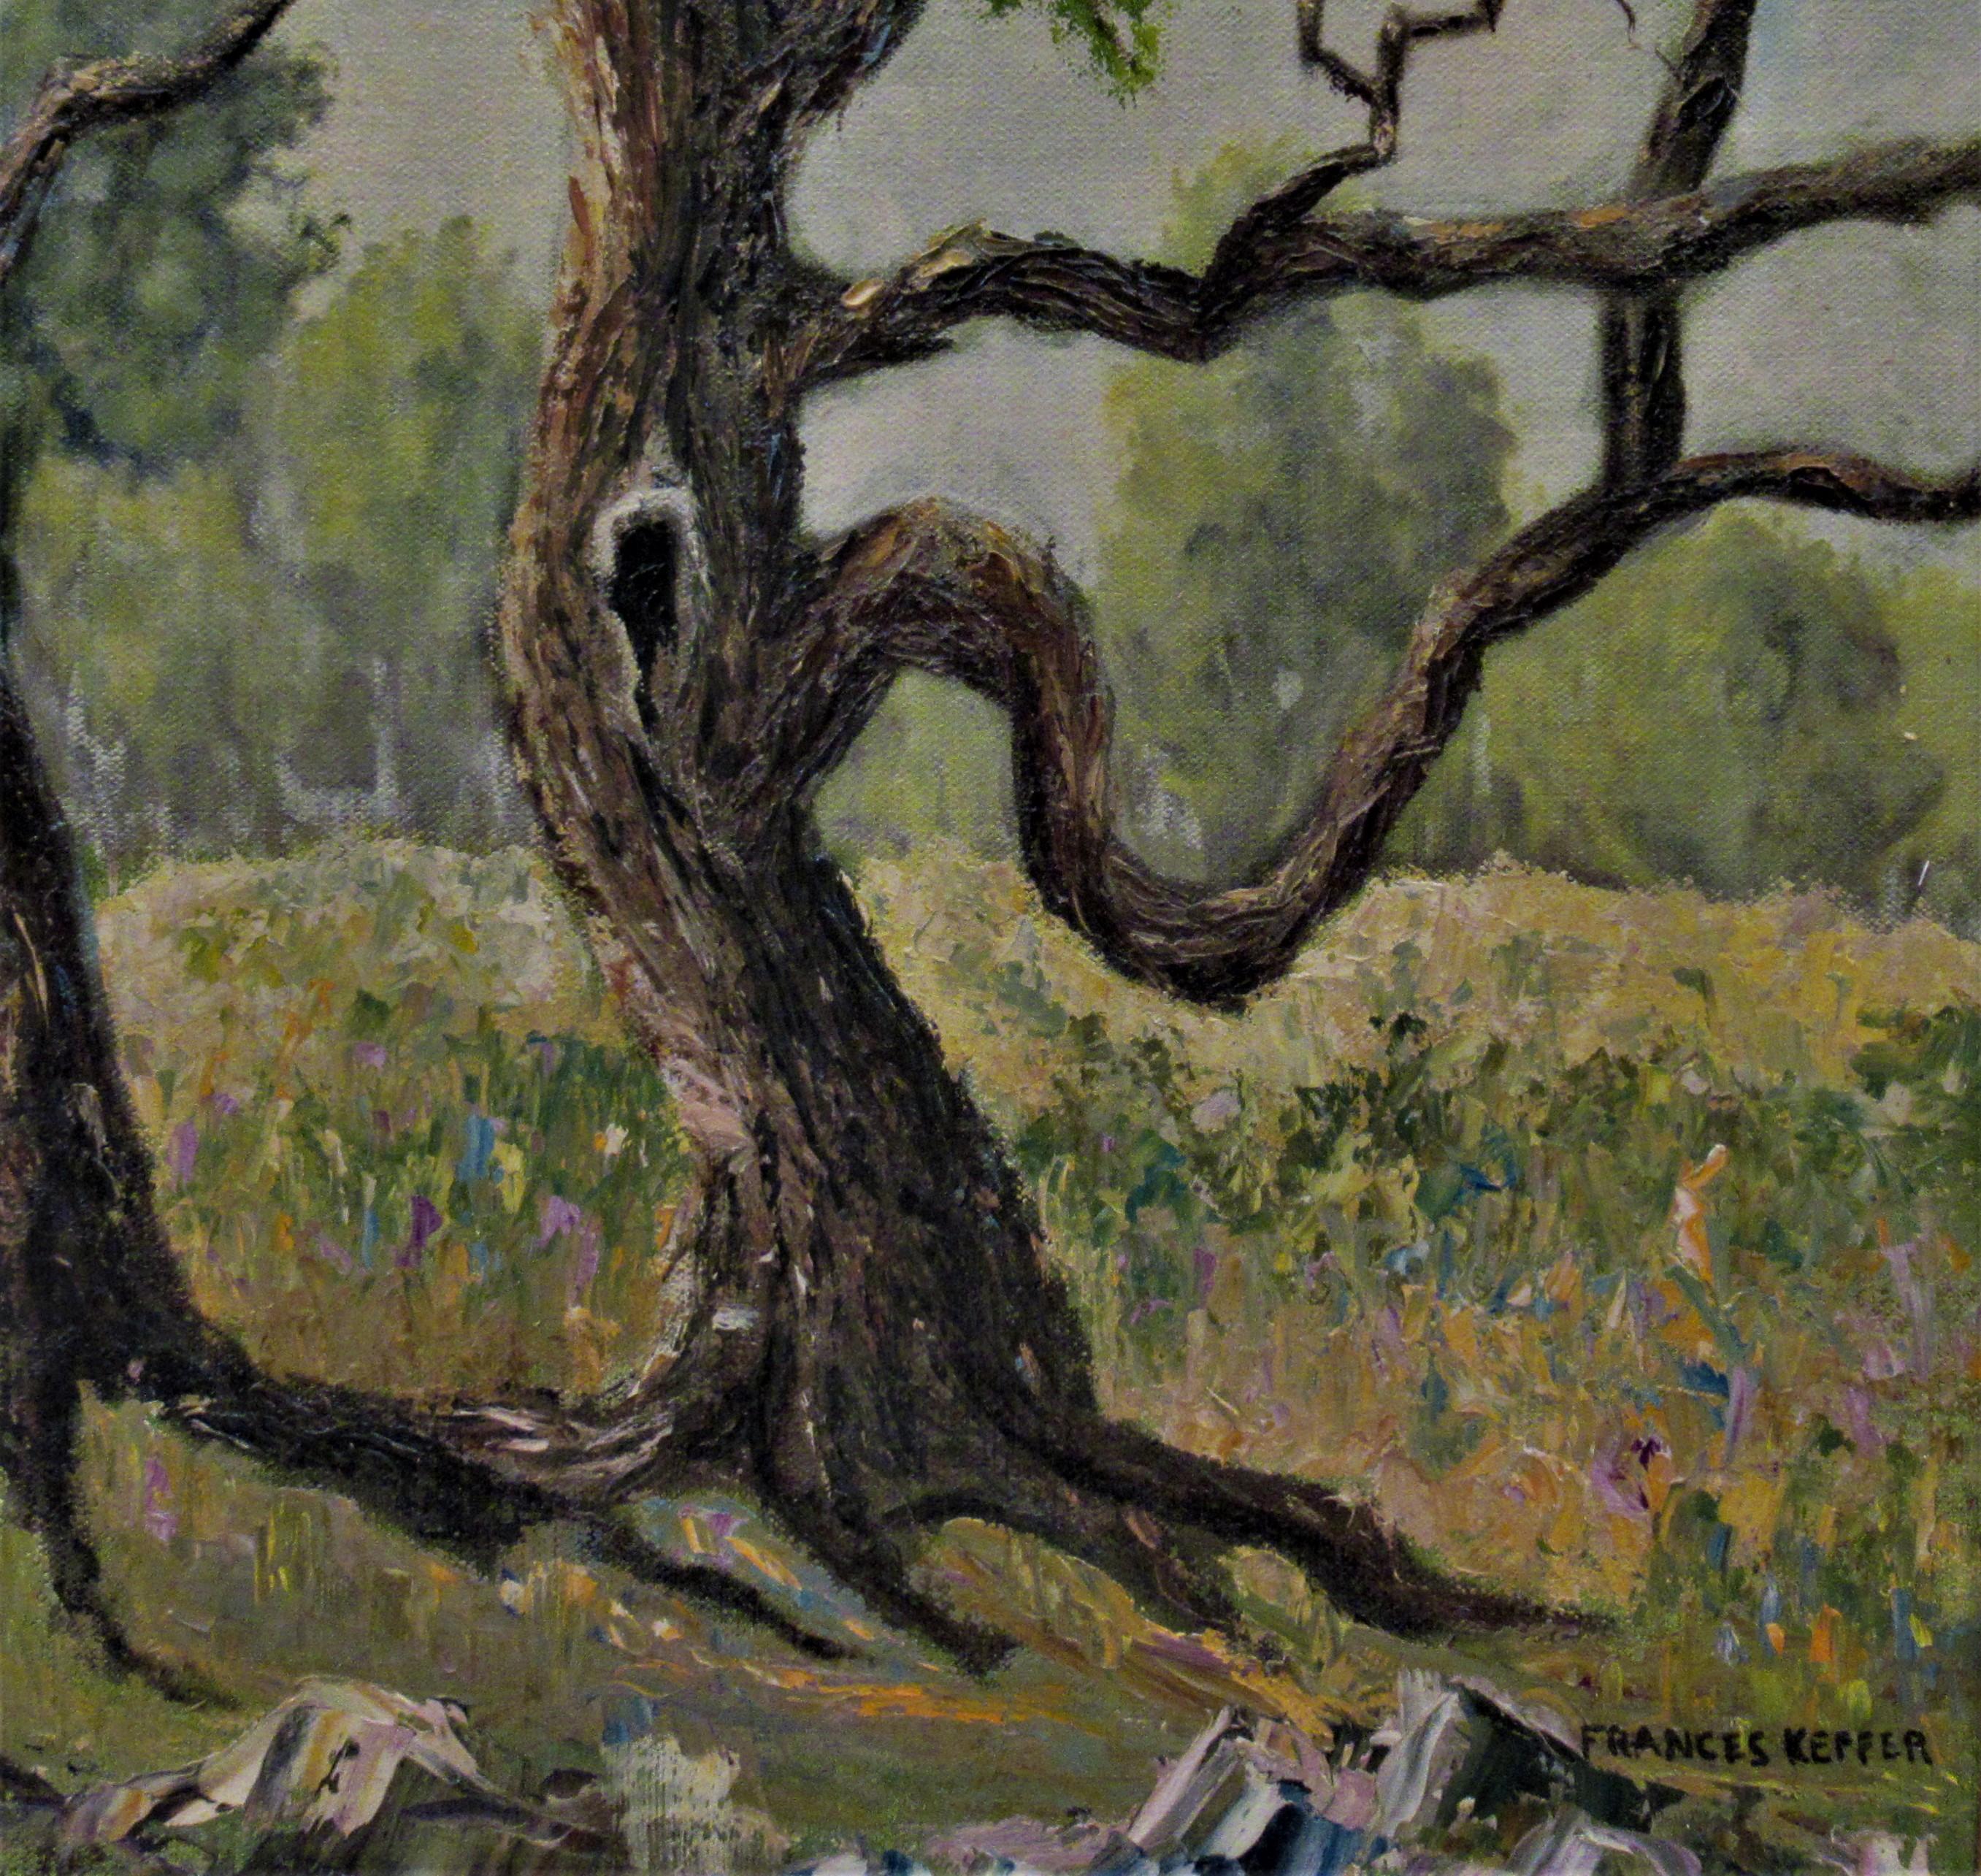 Landscape with Trees - American Impressionist Painting by Frances Alice Keffer